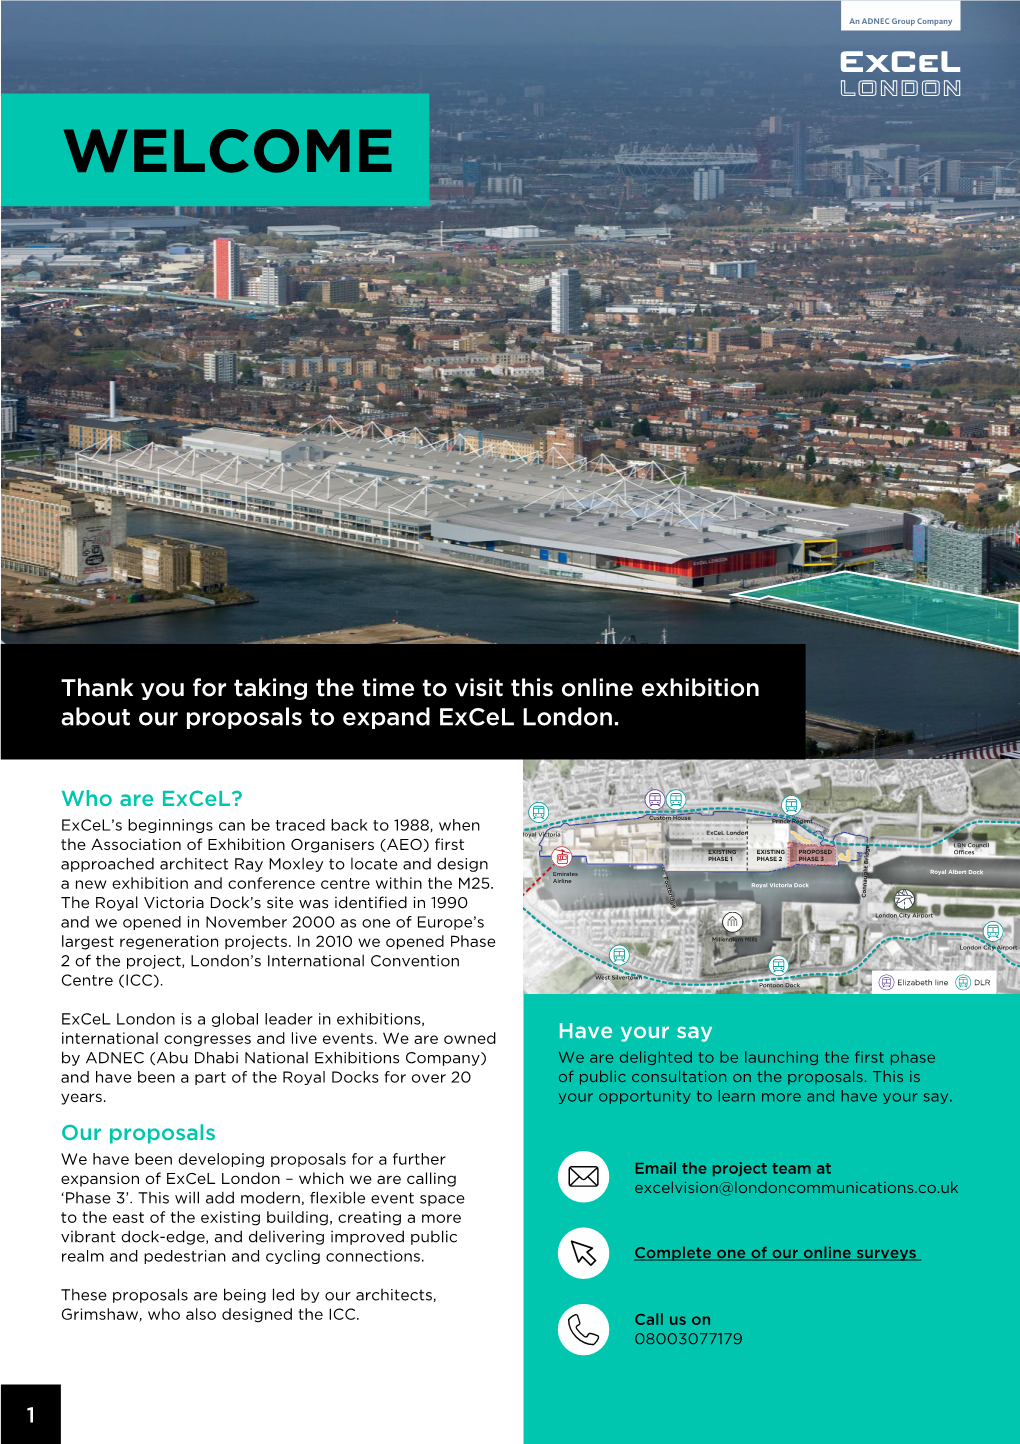 Thank You for Taking the Time to Visit This Online Exhibition About Our Proposals to Expand Excel London